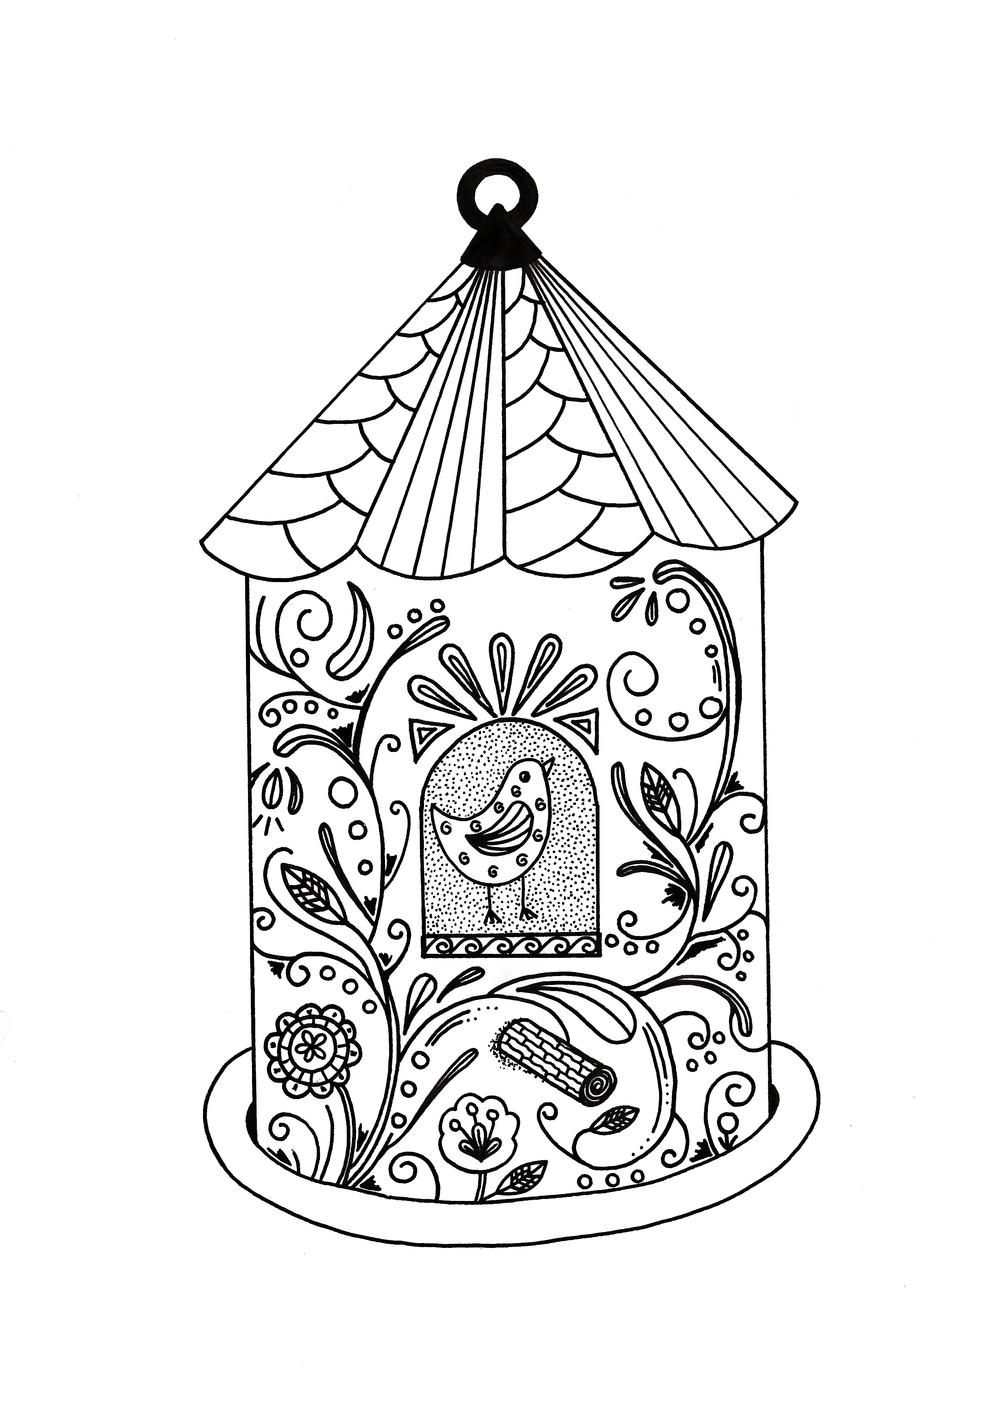 Download Whimsical Bird House Adult Coloring Page | FaveCrafts.com